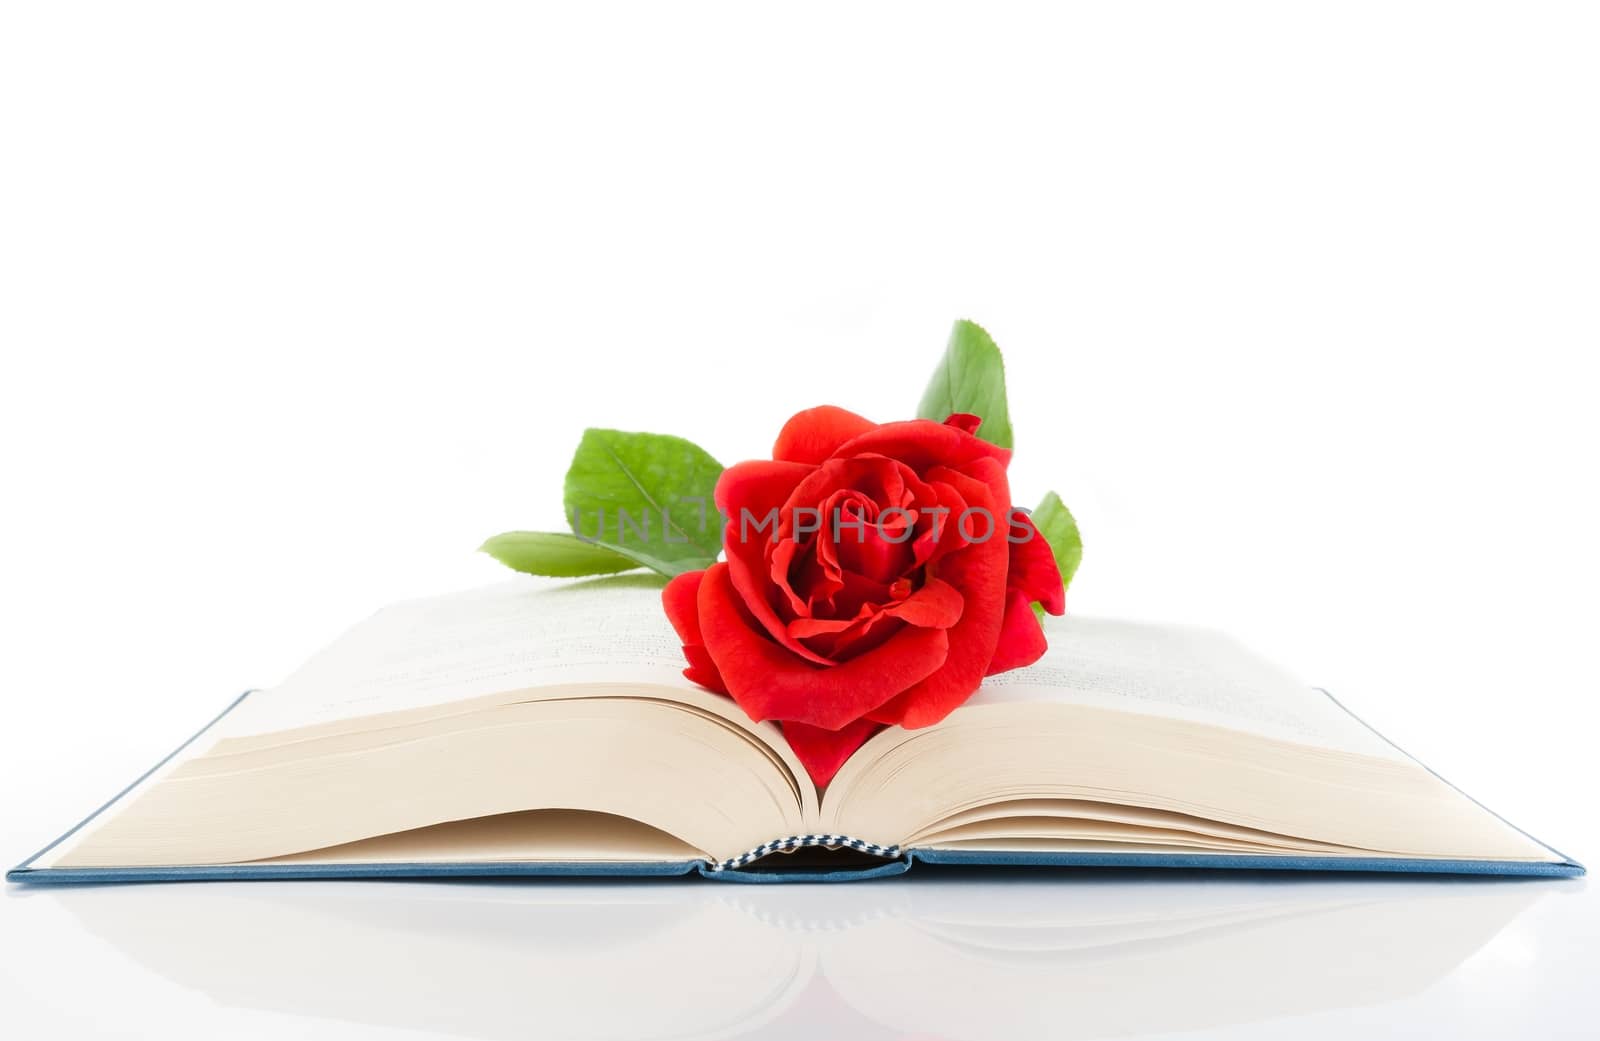 red rose on the open book on white background with space for text